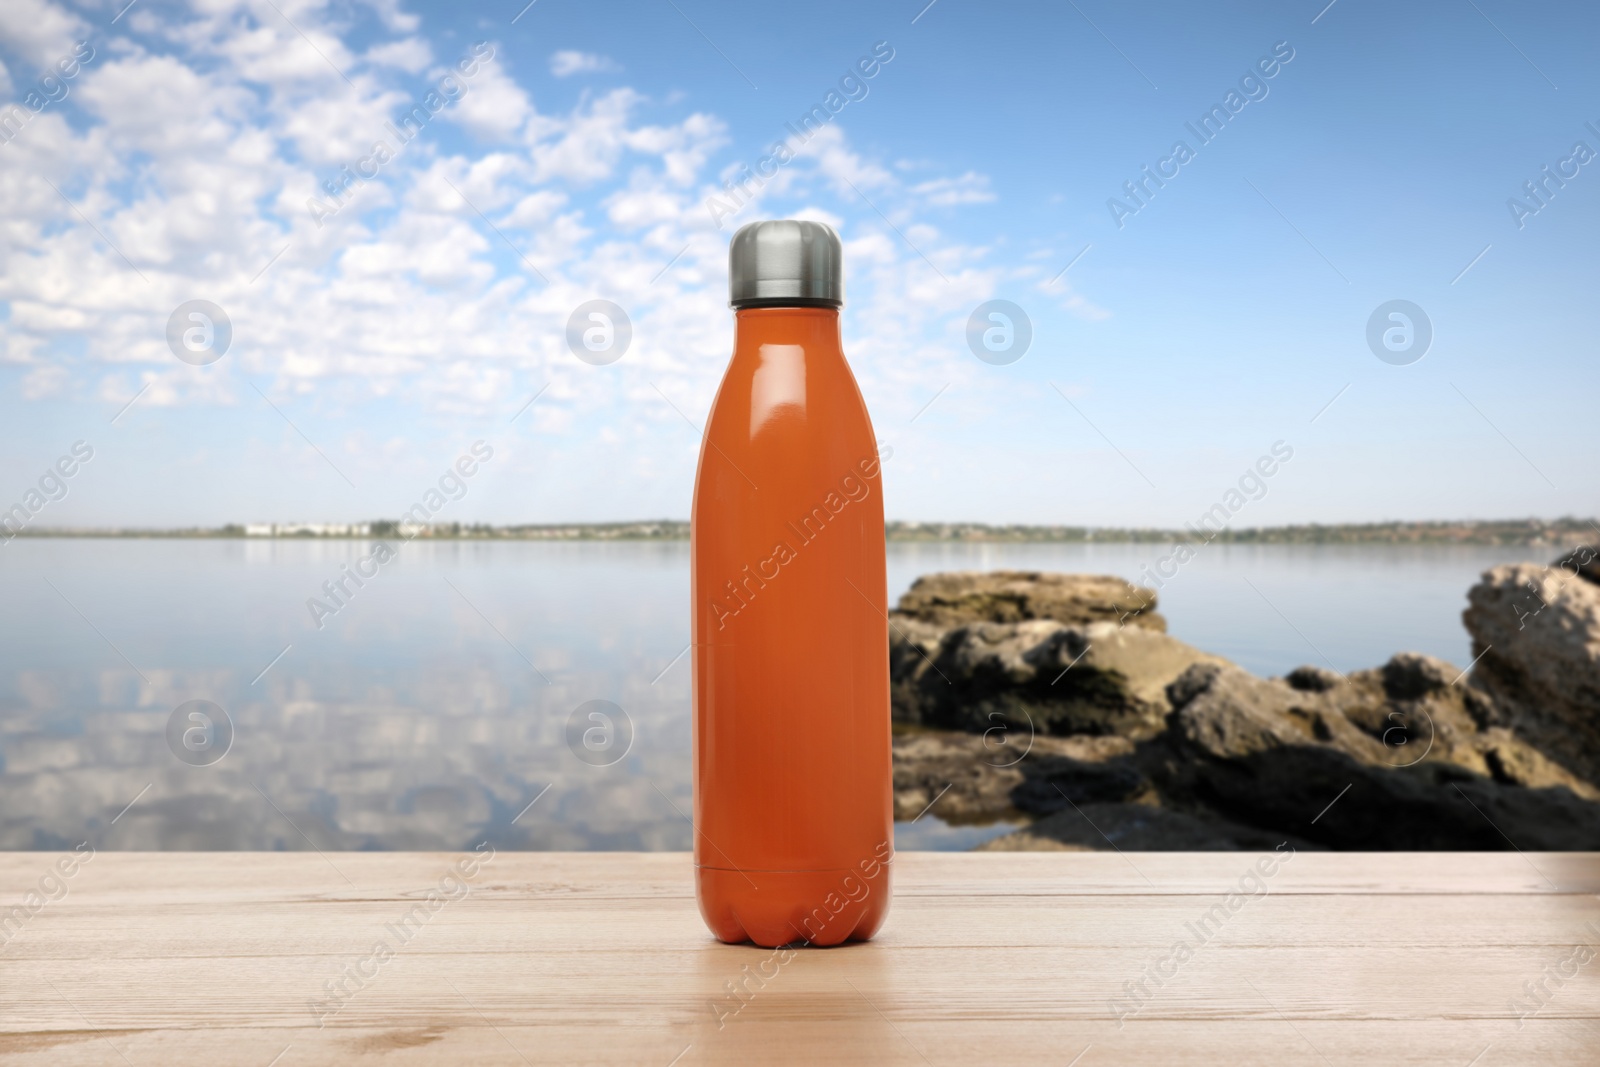 Image of Thermo bottle on wooden table near sea under blue sky